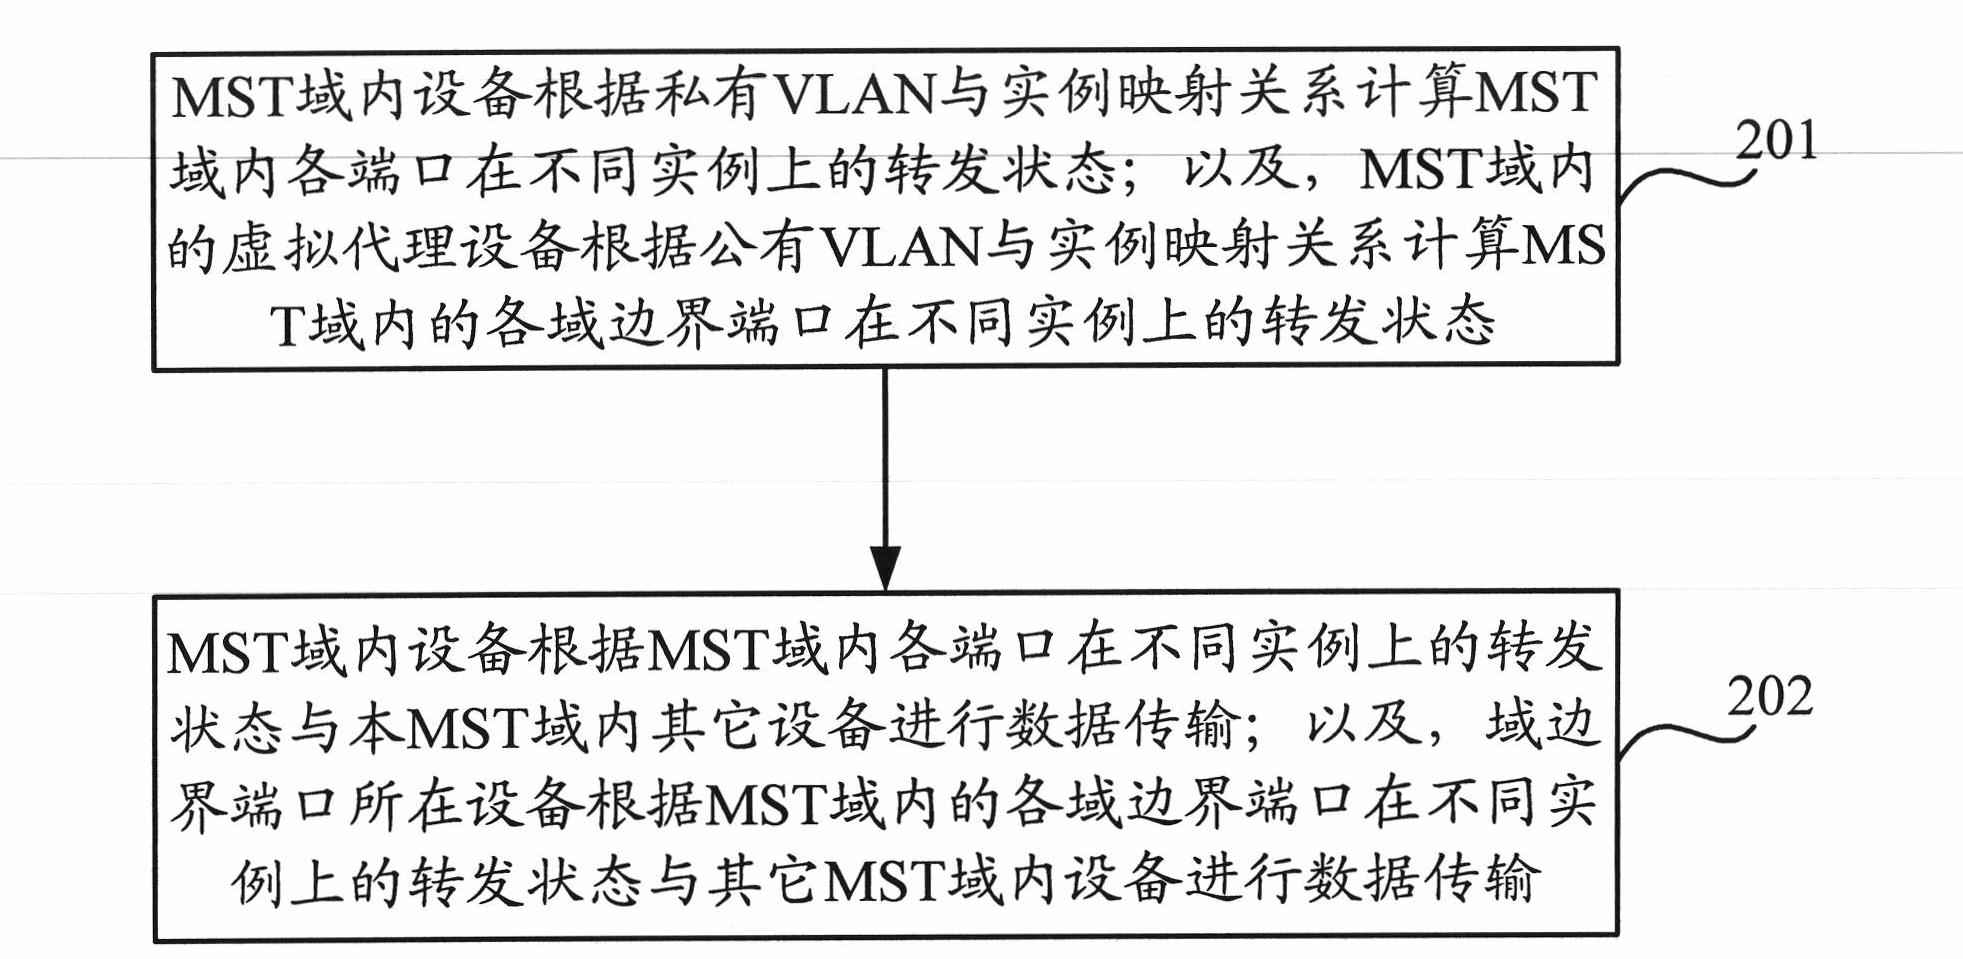 Method and equipment for transmitting data among different MST (Multiple Spanning Tree) regions